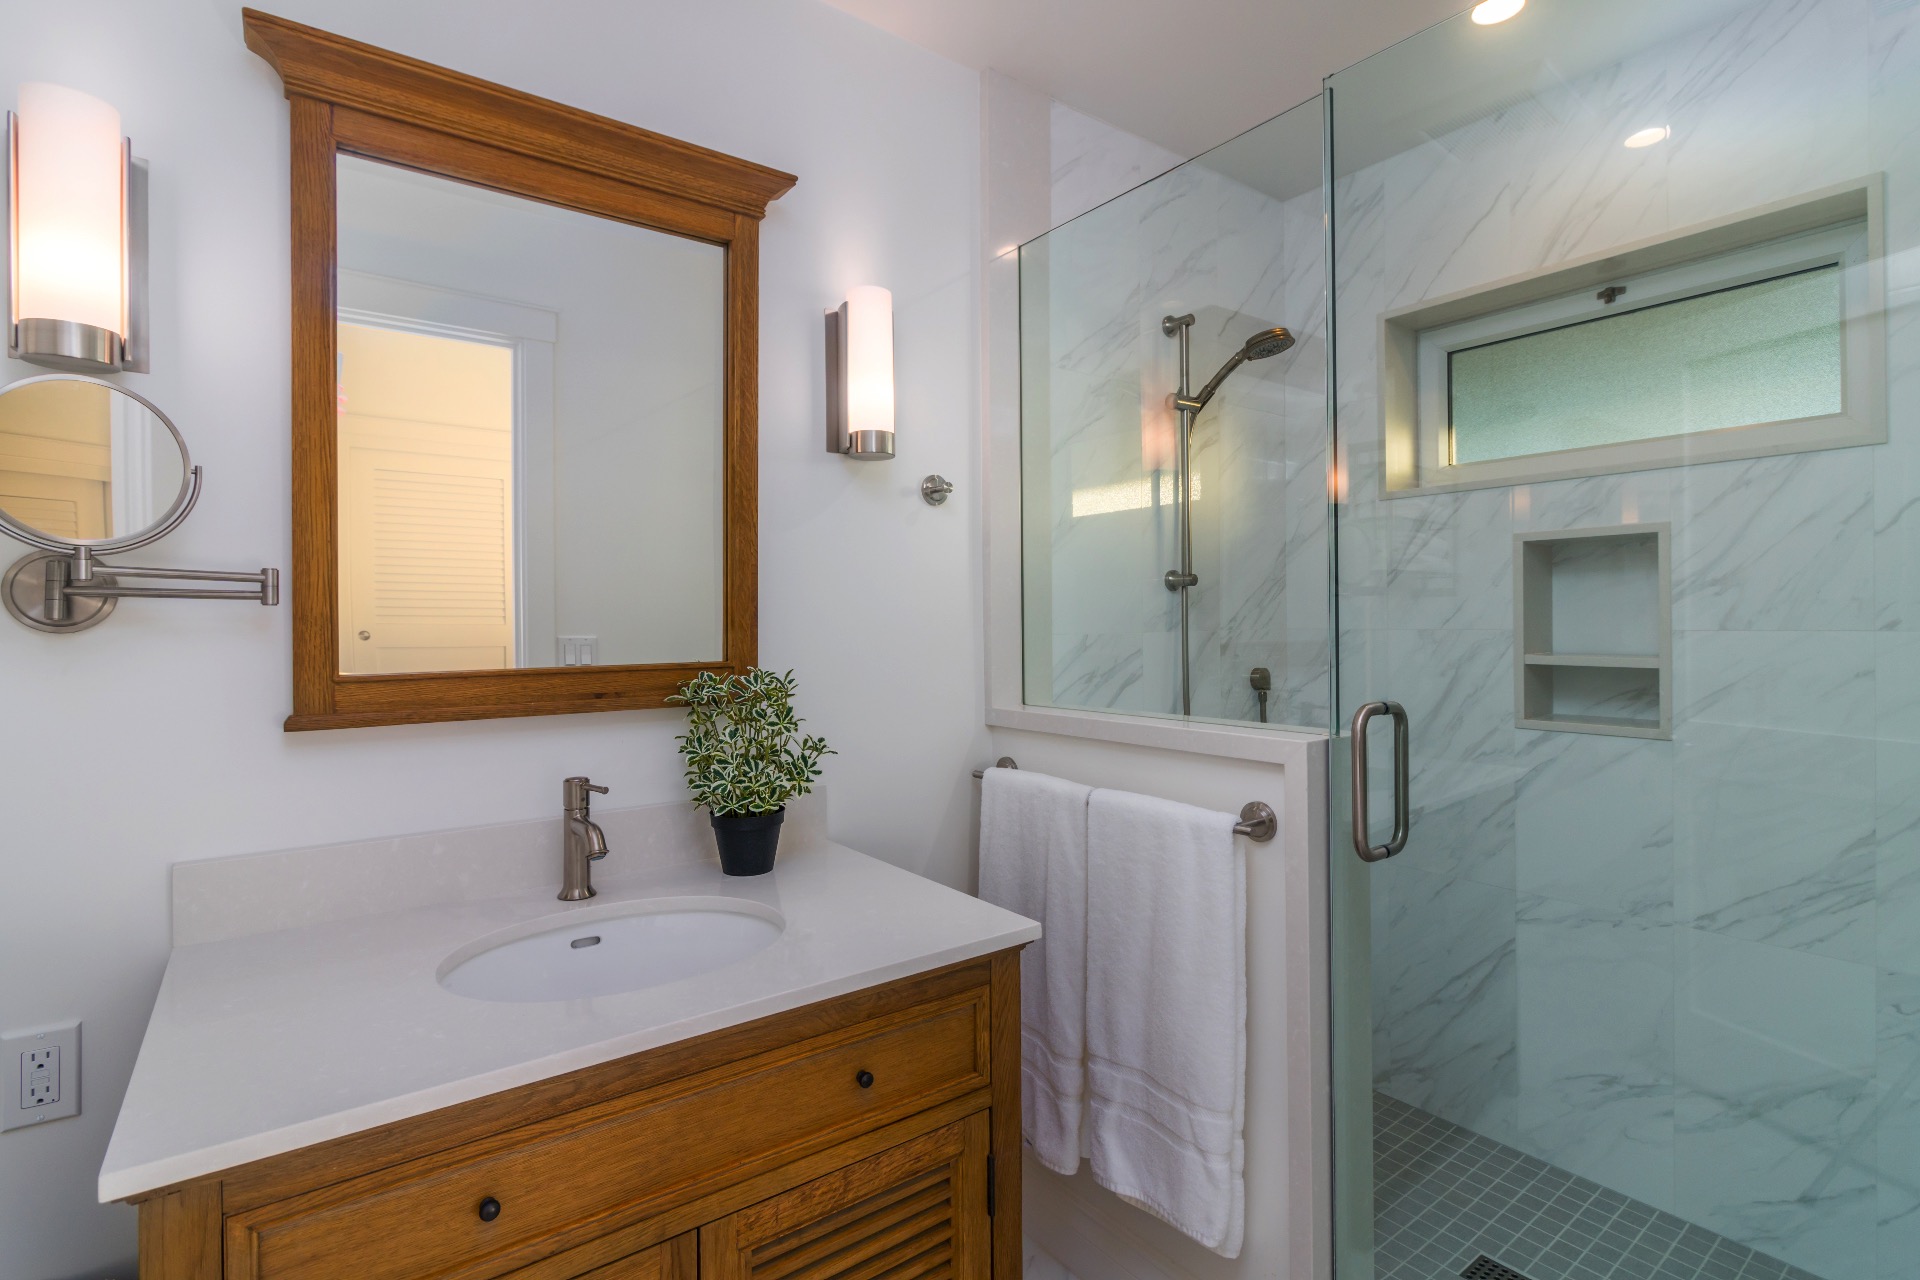 Enjoy the privacy of your own ensuite with walk in shower located in the queen bedroom upstairs.